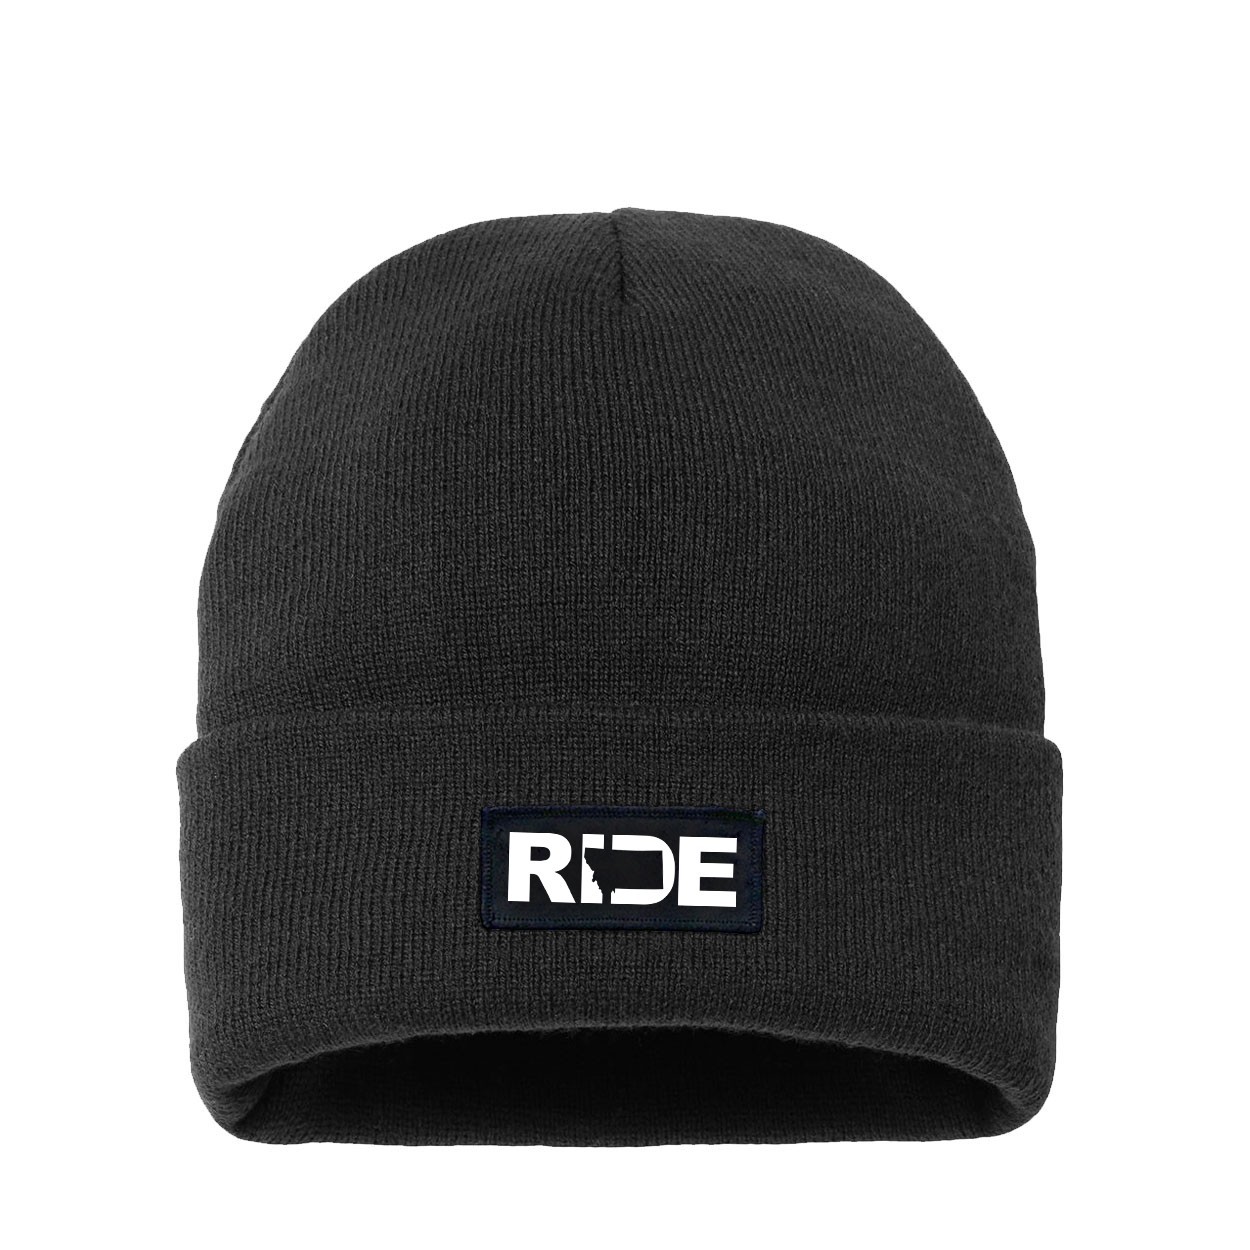 Ride Montana Night Out Woven Patch Night Out Sherpa Lined Cuffed Beanie Black (White Logo)